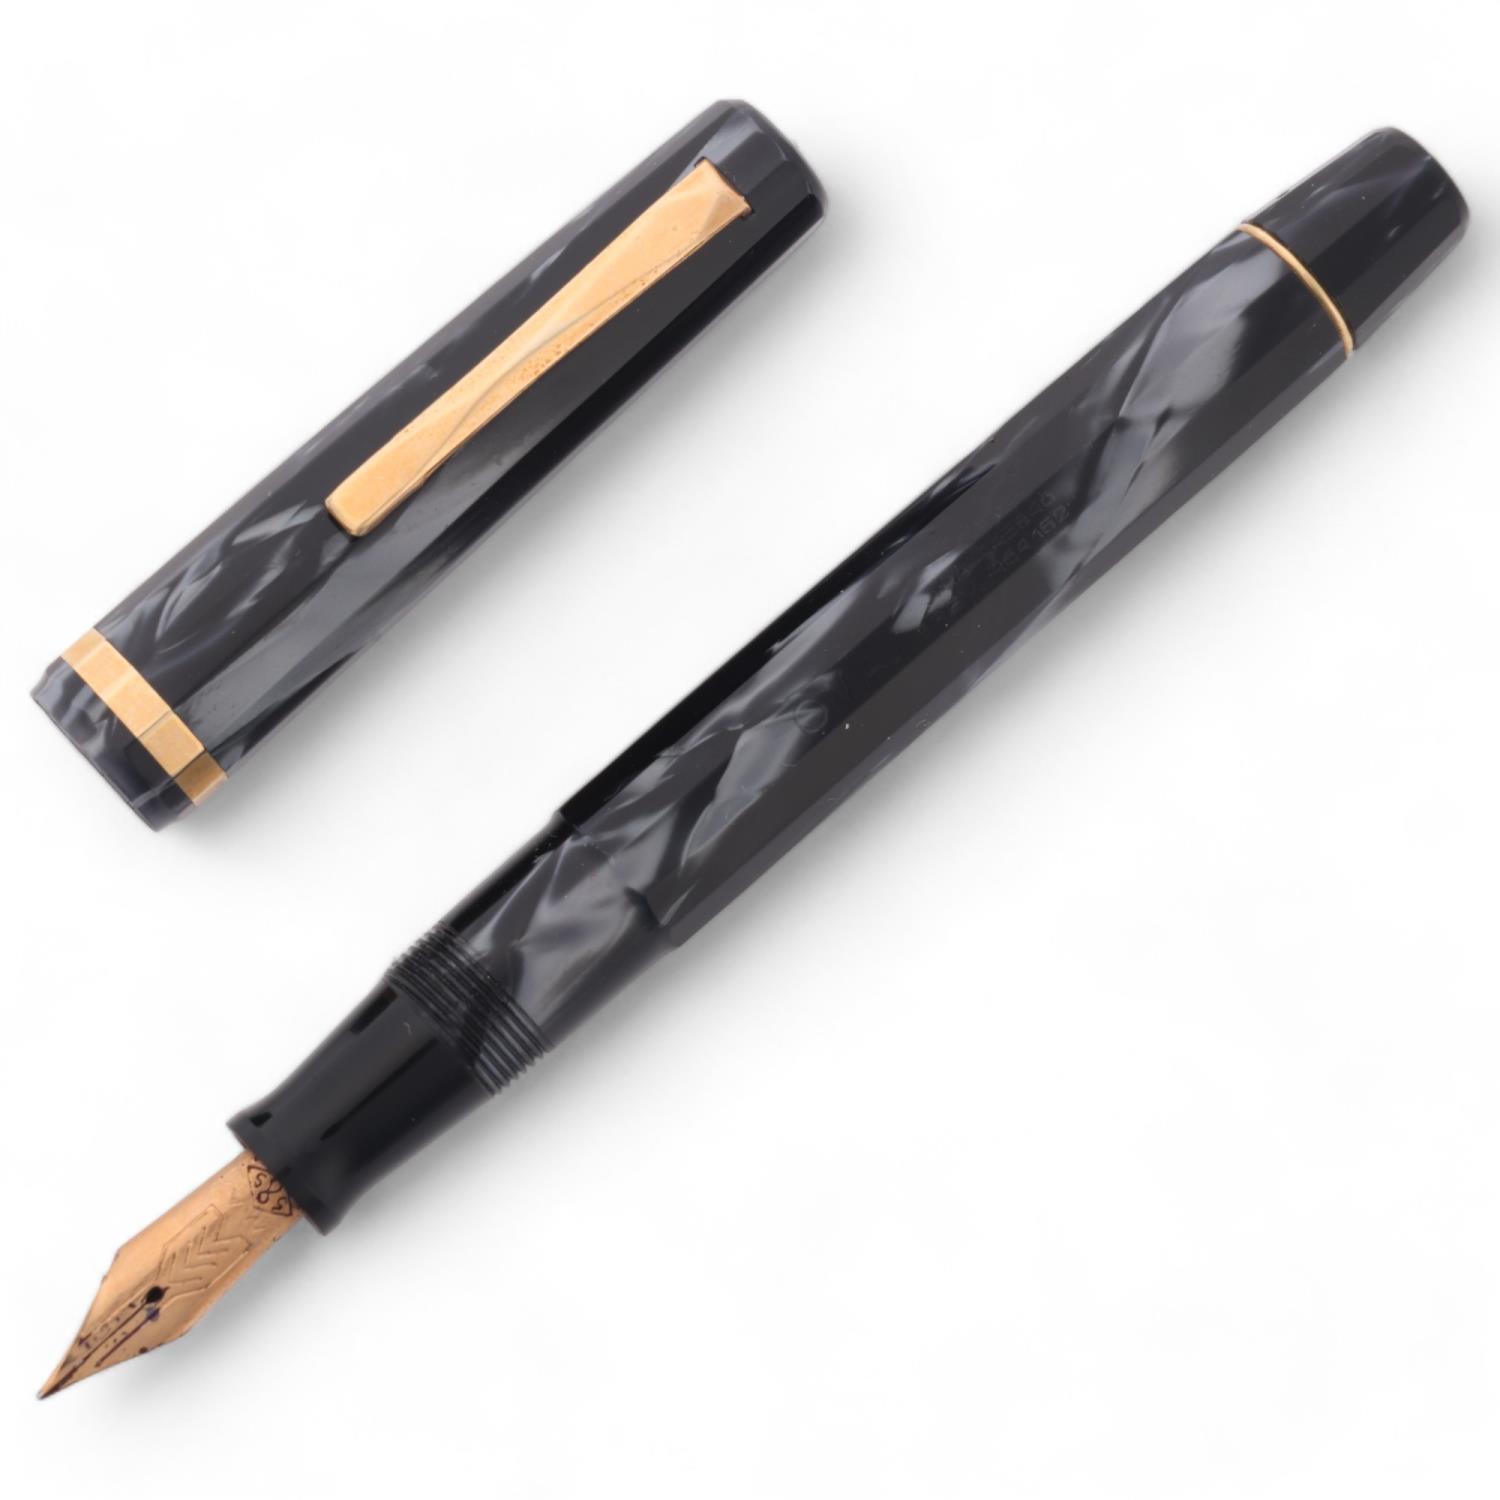 An Omas Dama fountain pen, with 14ct nib and black marbled resin, marked "EXTRA 445846